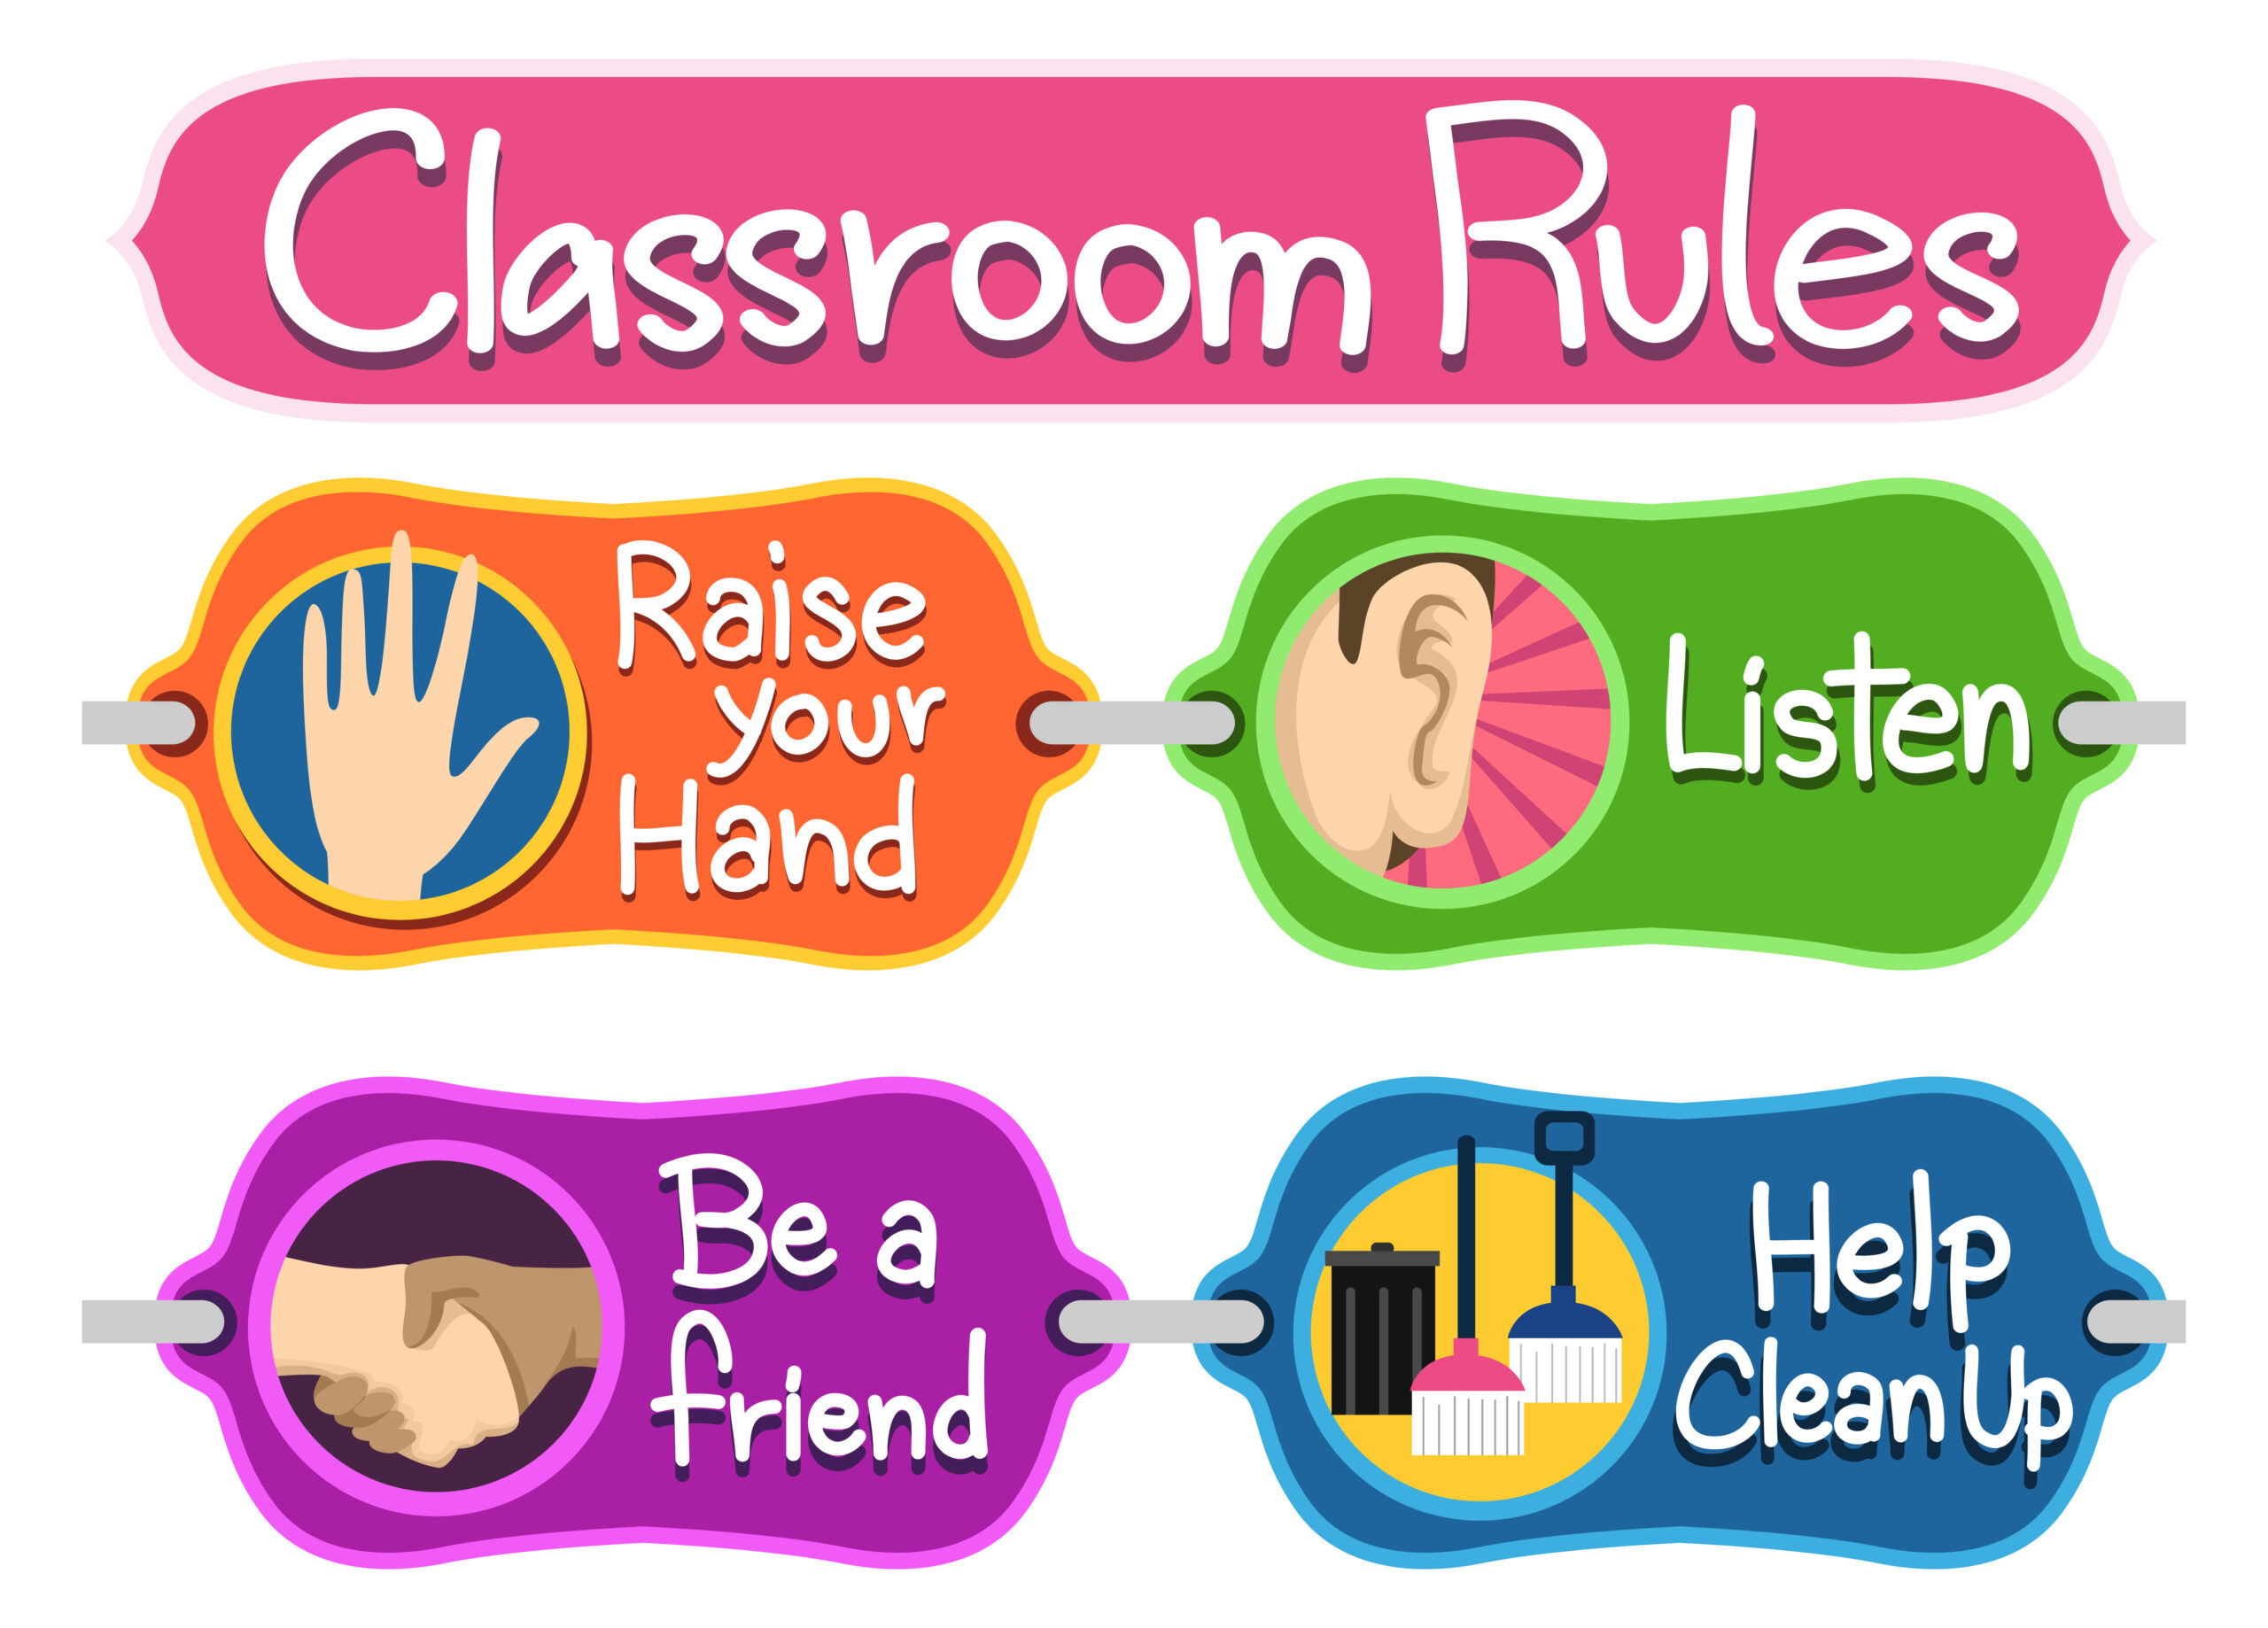 Are clean started. Rules in the Classroom. Classroom Rules плакат. Classroom English плакат. Classroom Rules poster.